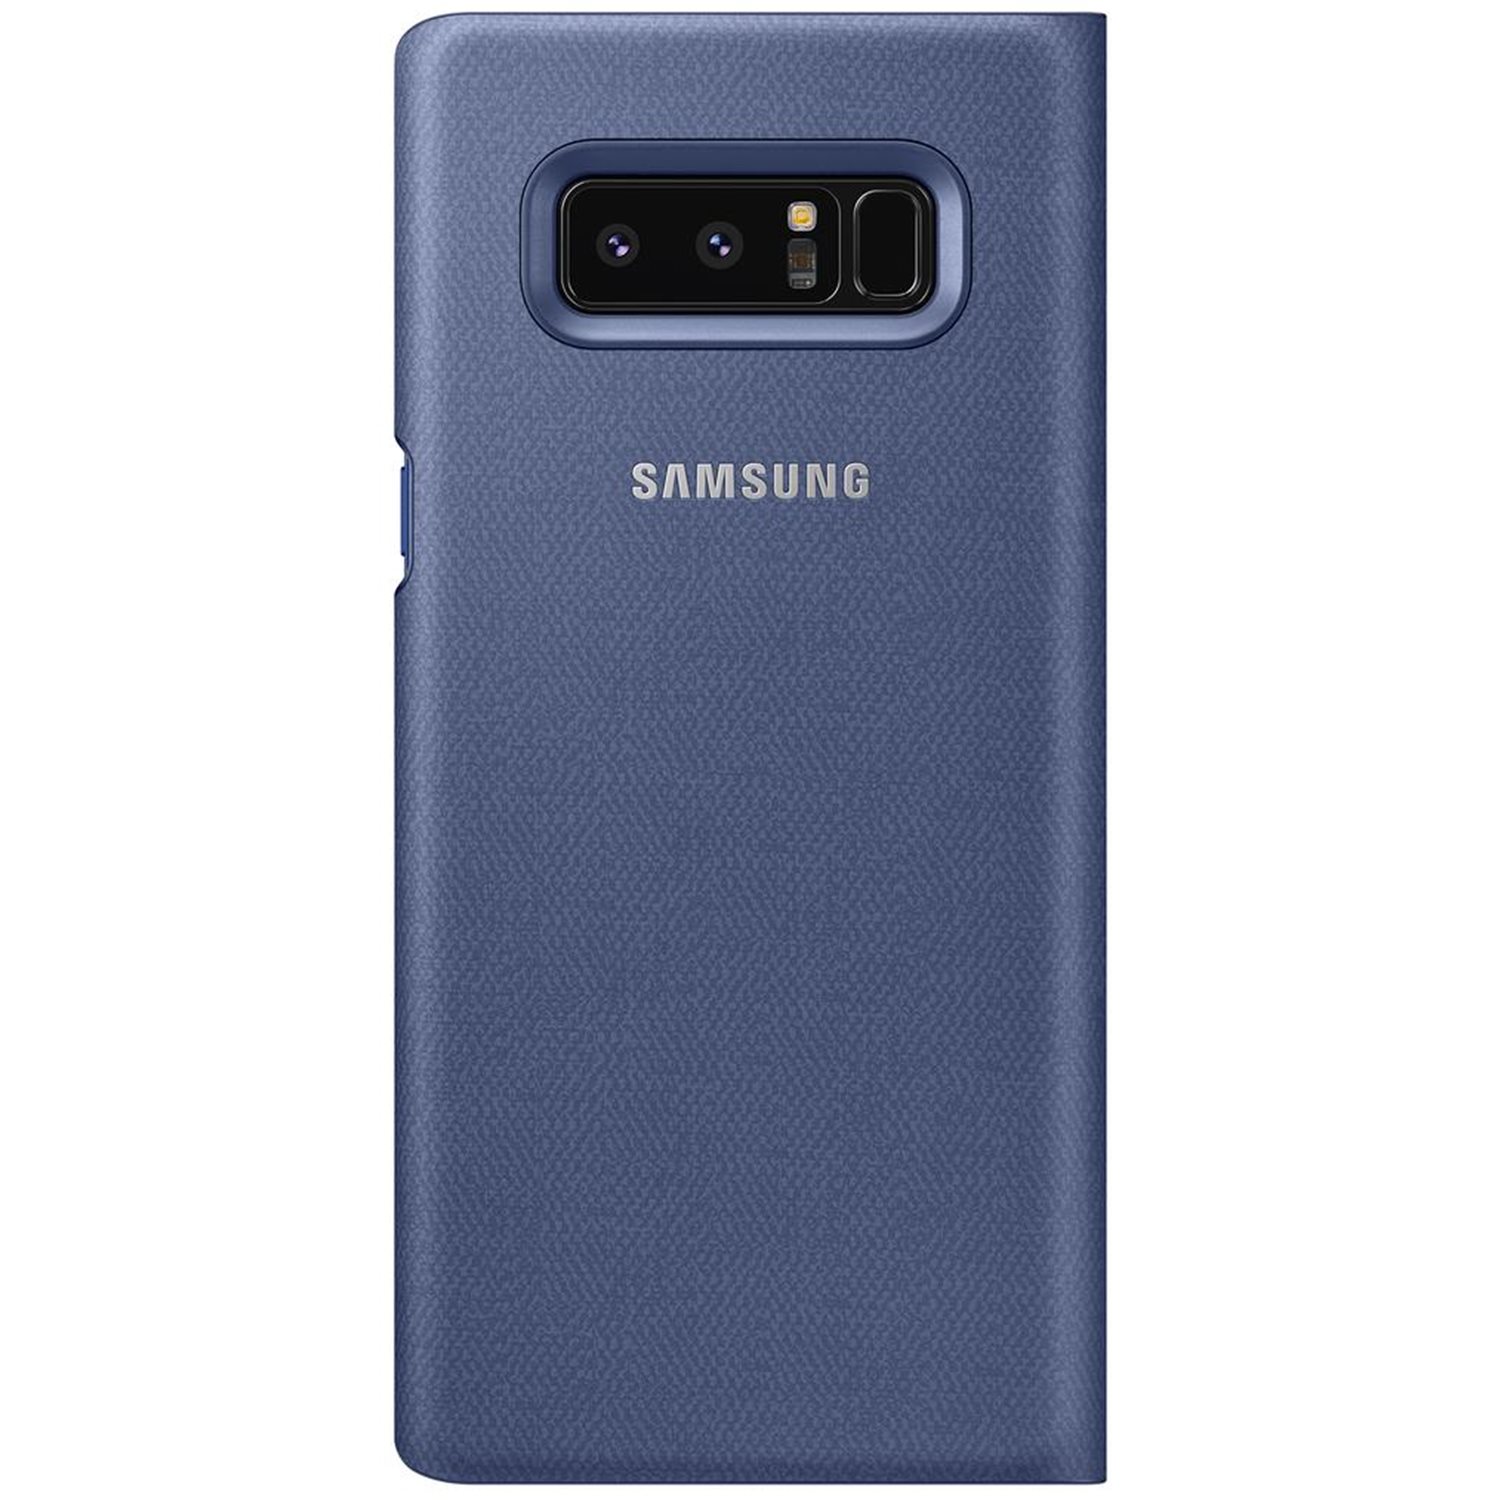 Official Samsung Galaxy Note 8 LED View Cover Case - Deep Blue